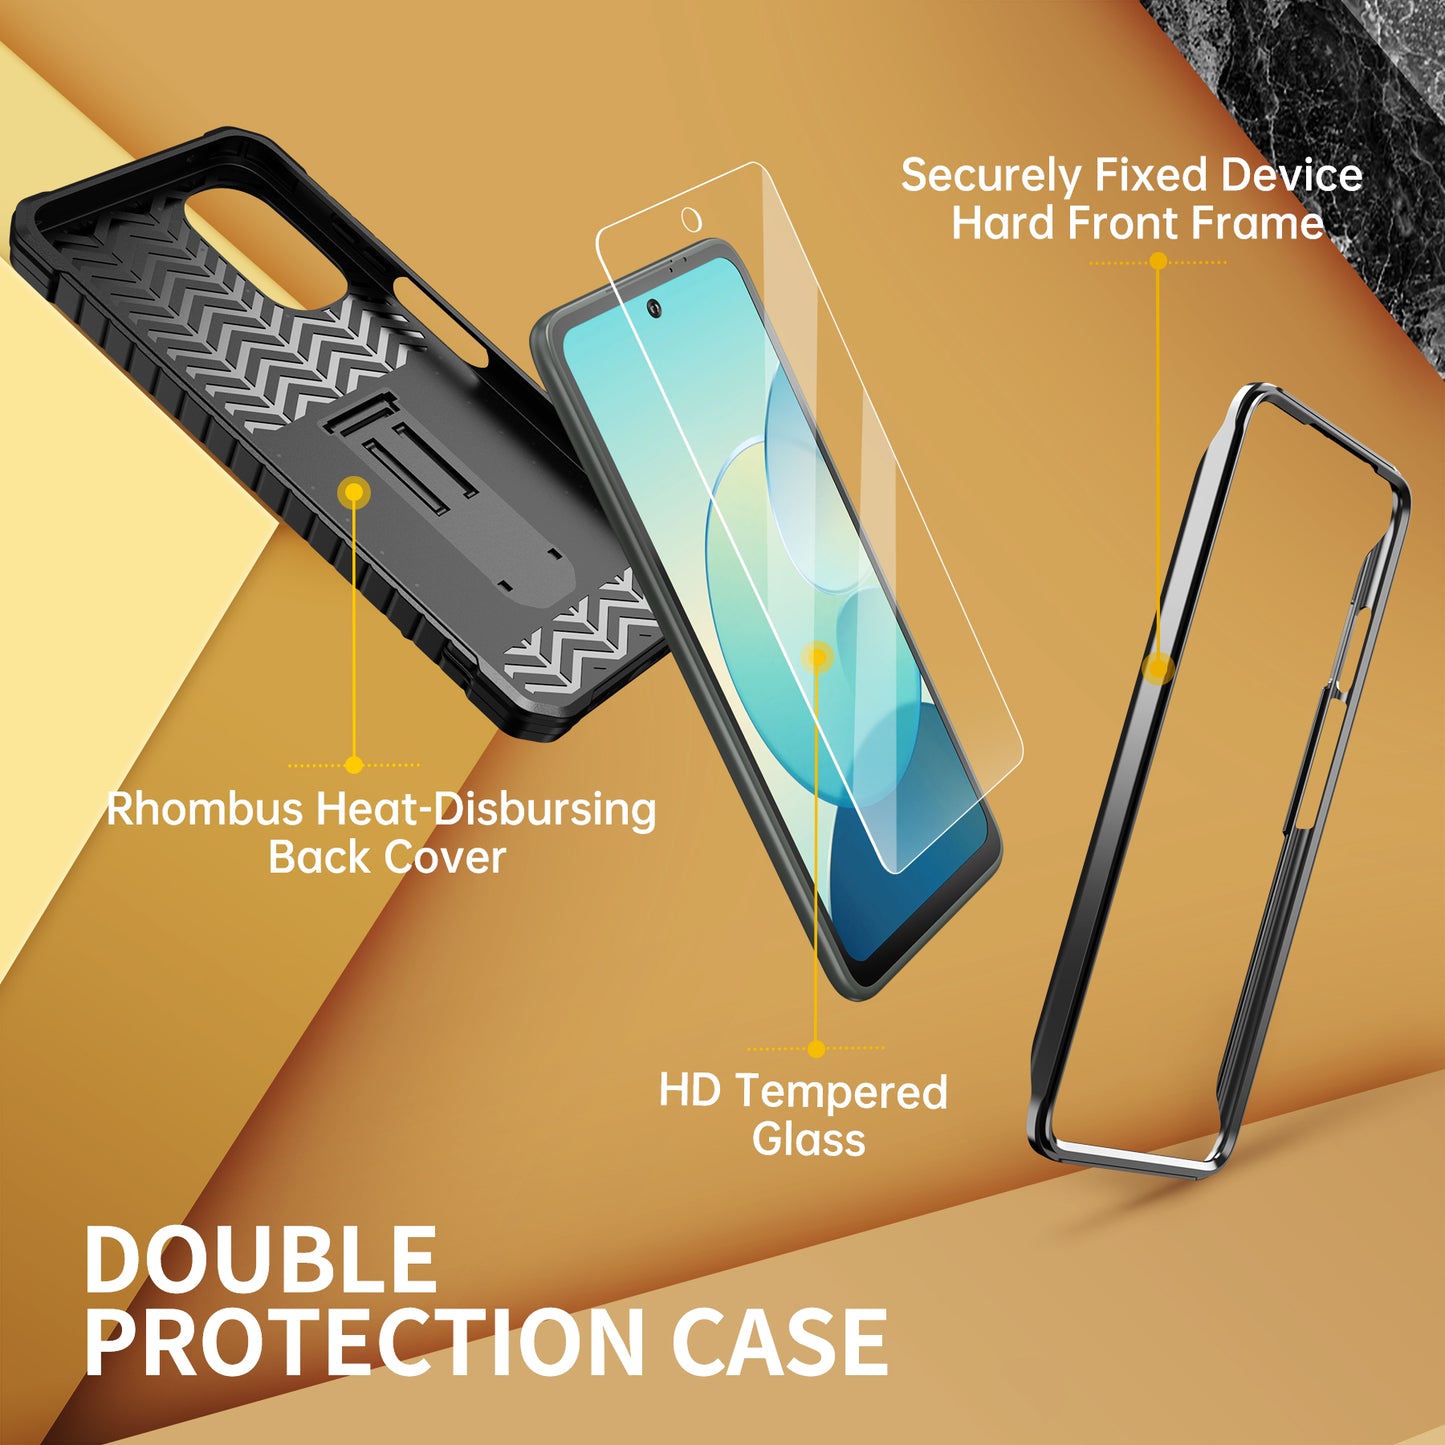 FITO for Moto G 2022 Case, Dual Layer Shockproof Heavy Duty Case for Moto G 2022 Phone with Screen Protector, Built-in Kickstand